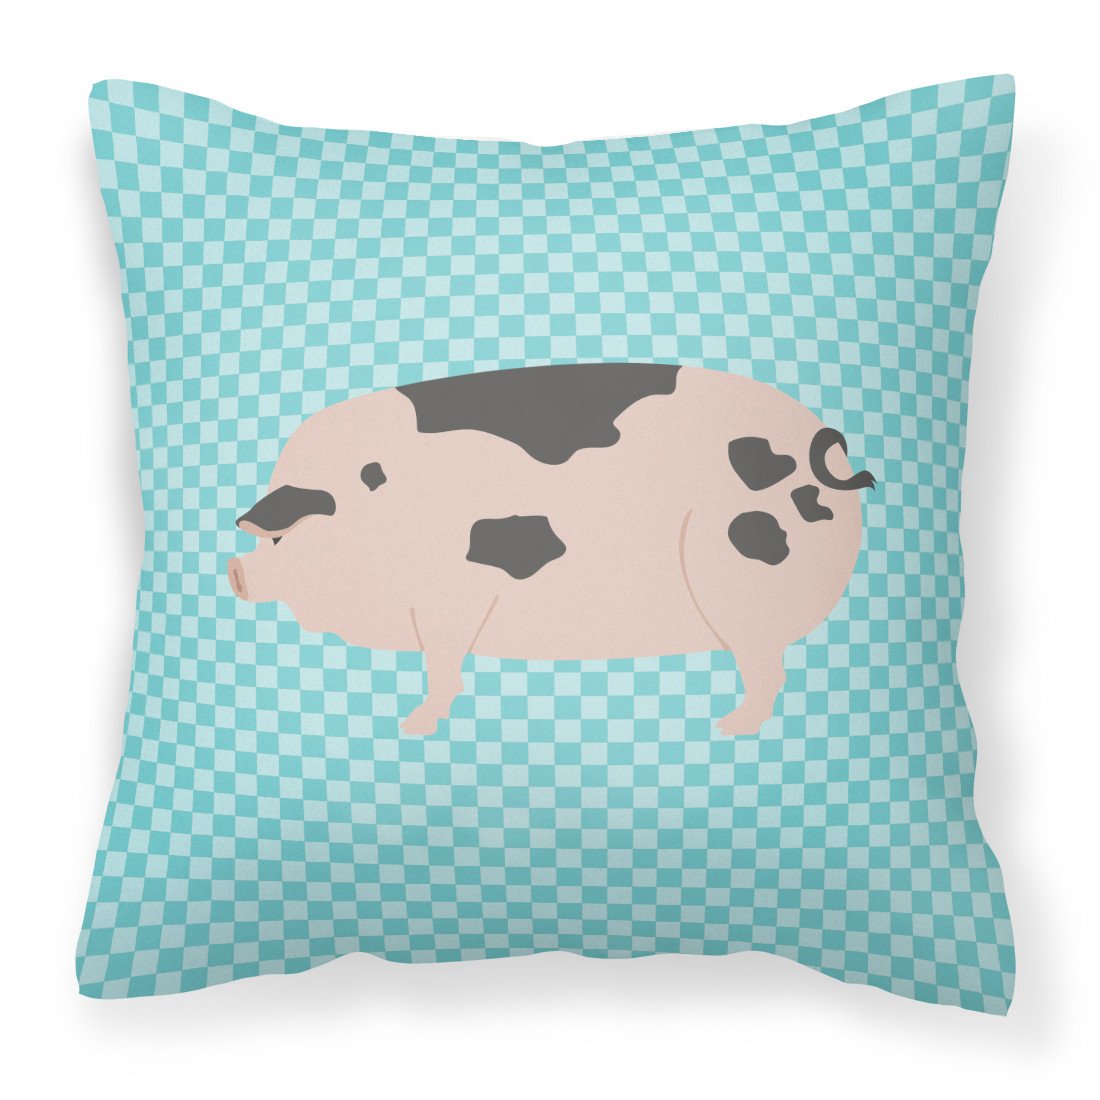 Gloucester Old Spot Pig Blue Check Fabric Decorative Pillow BB8114PW1818 by Caroline's Treasures